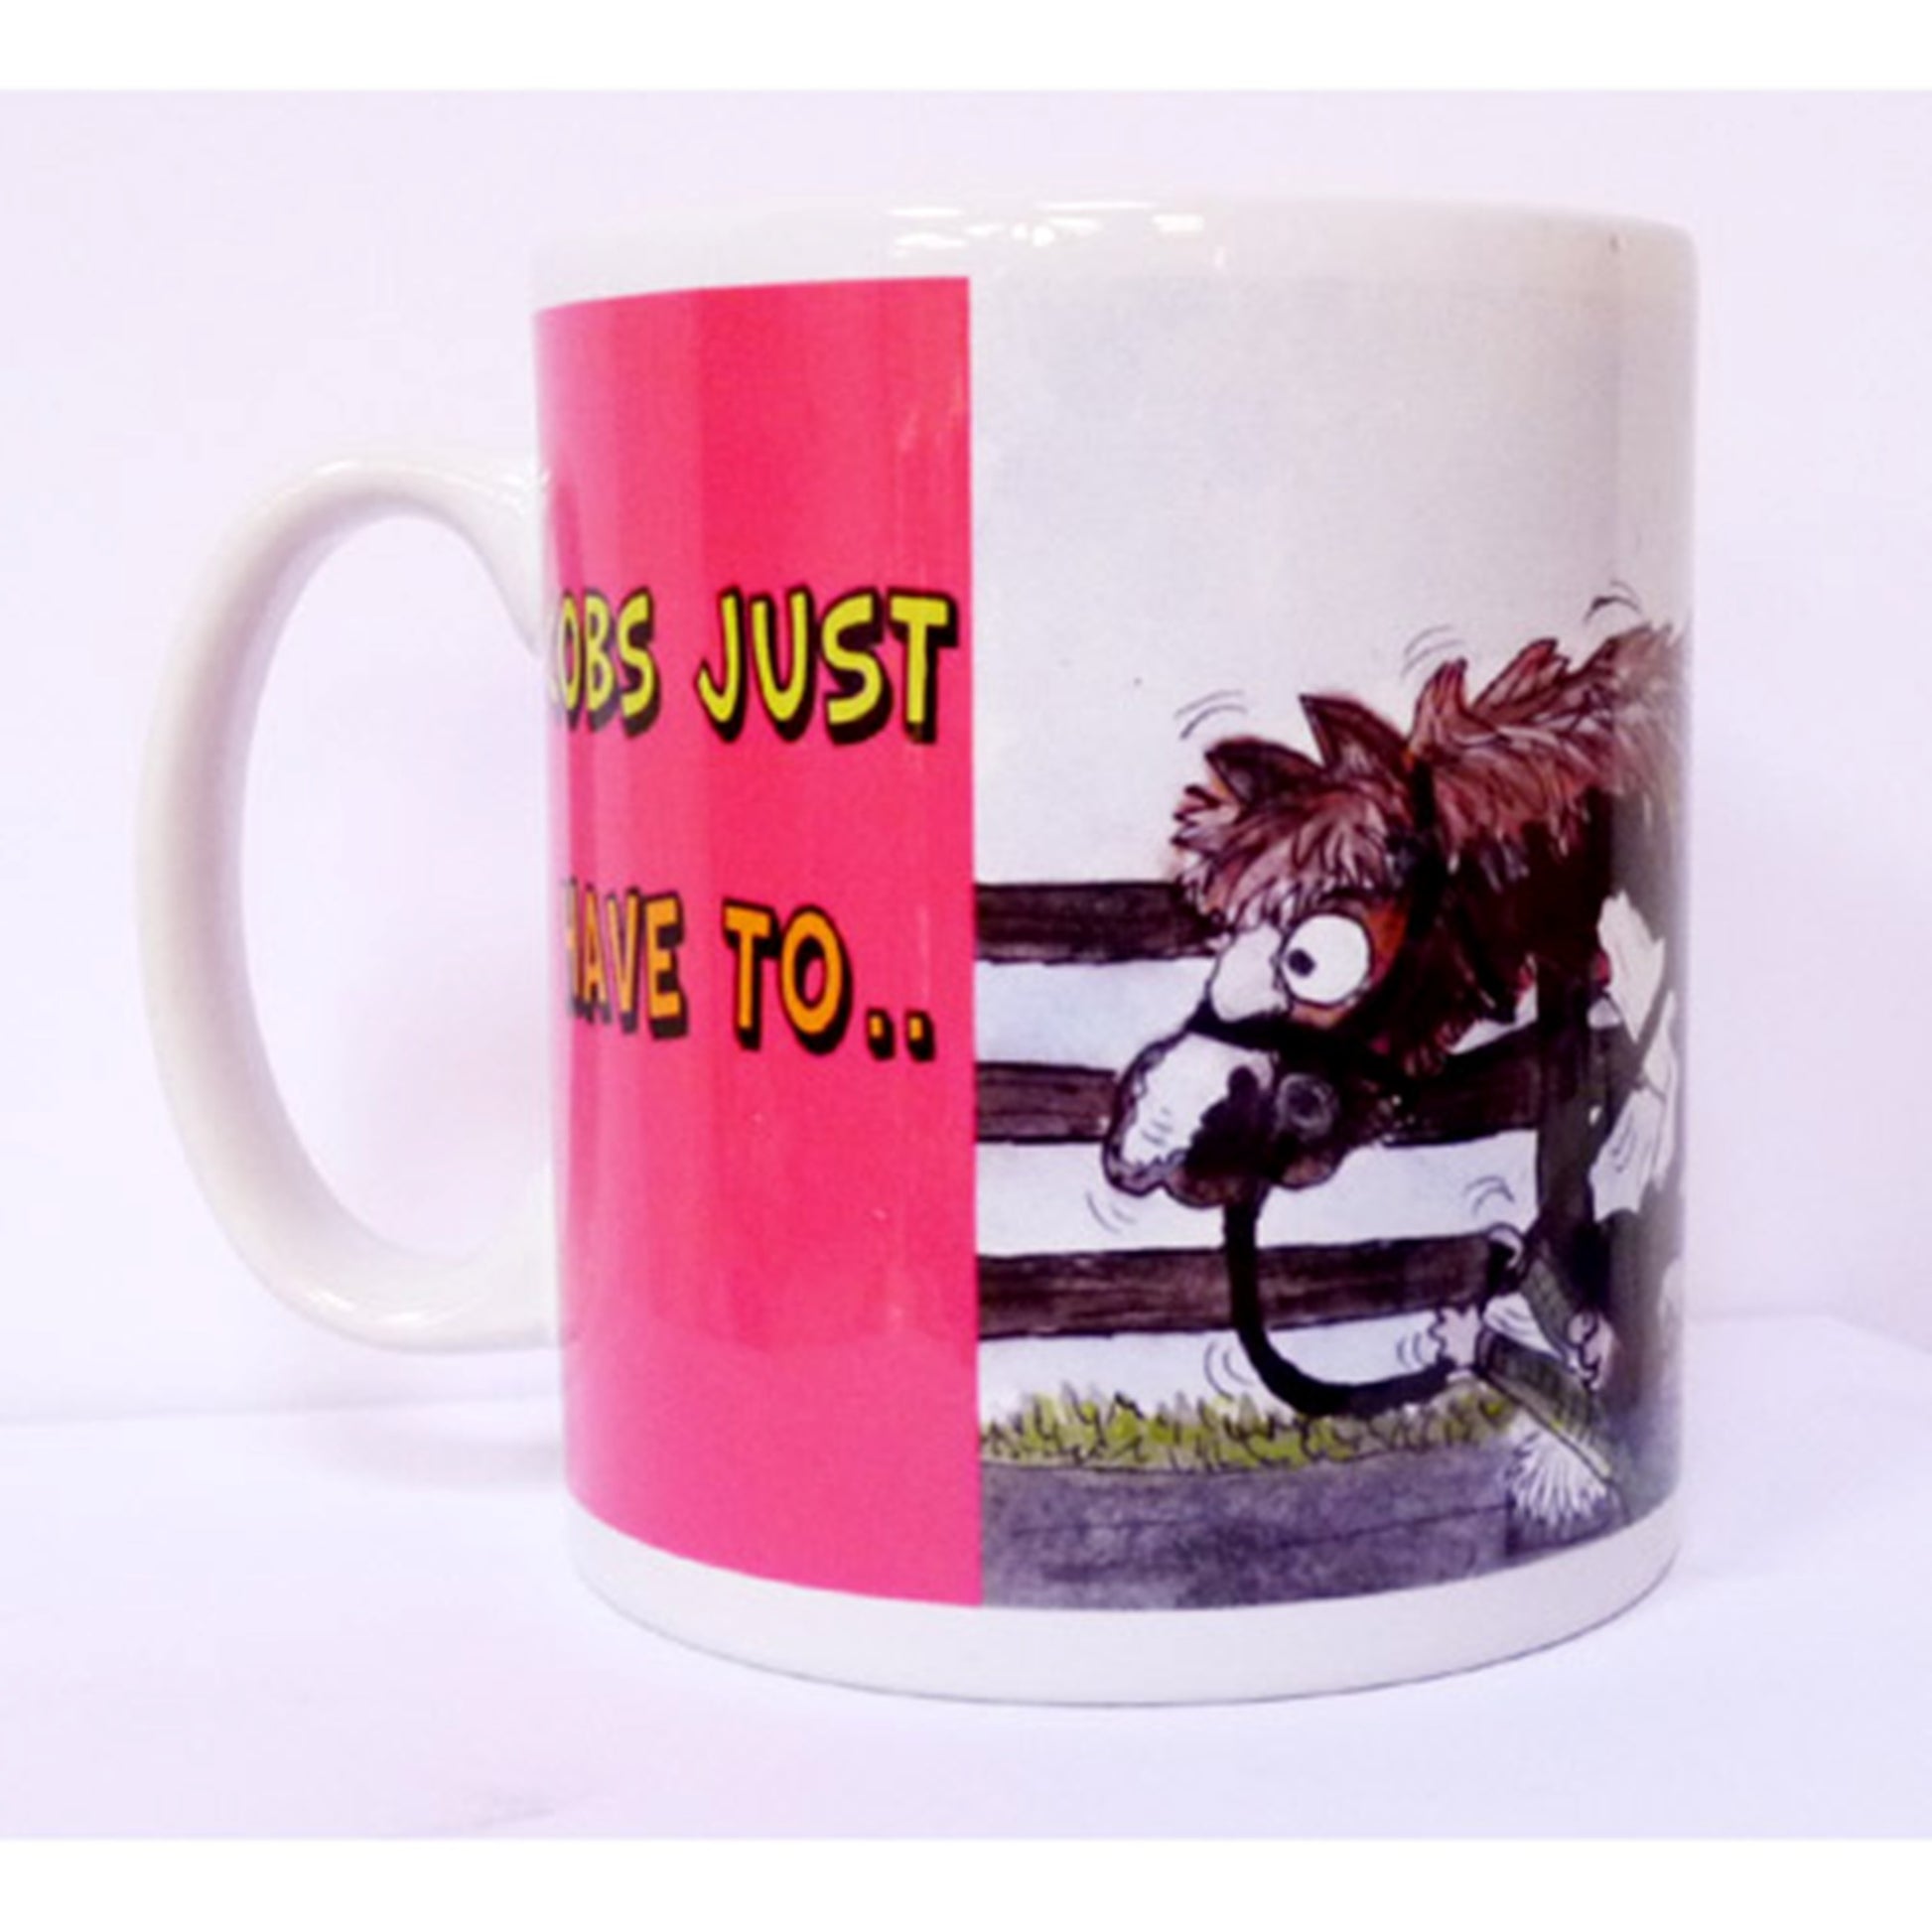 a mug showing a coloured cob horse walking over its owner